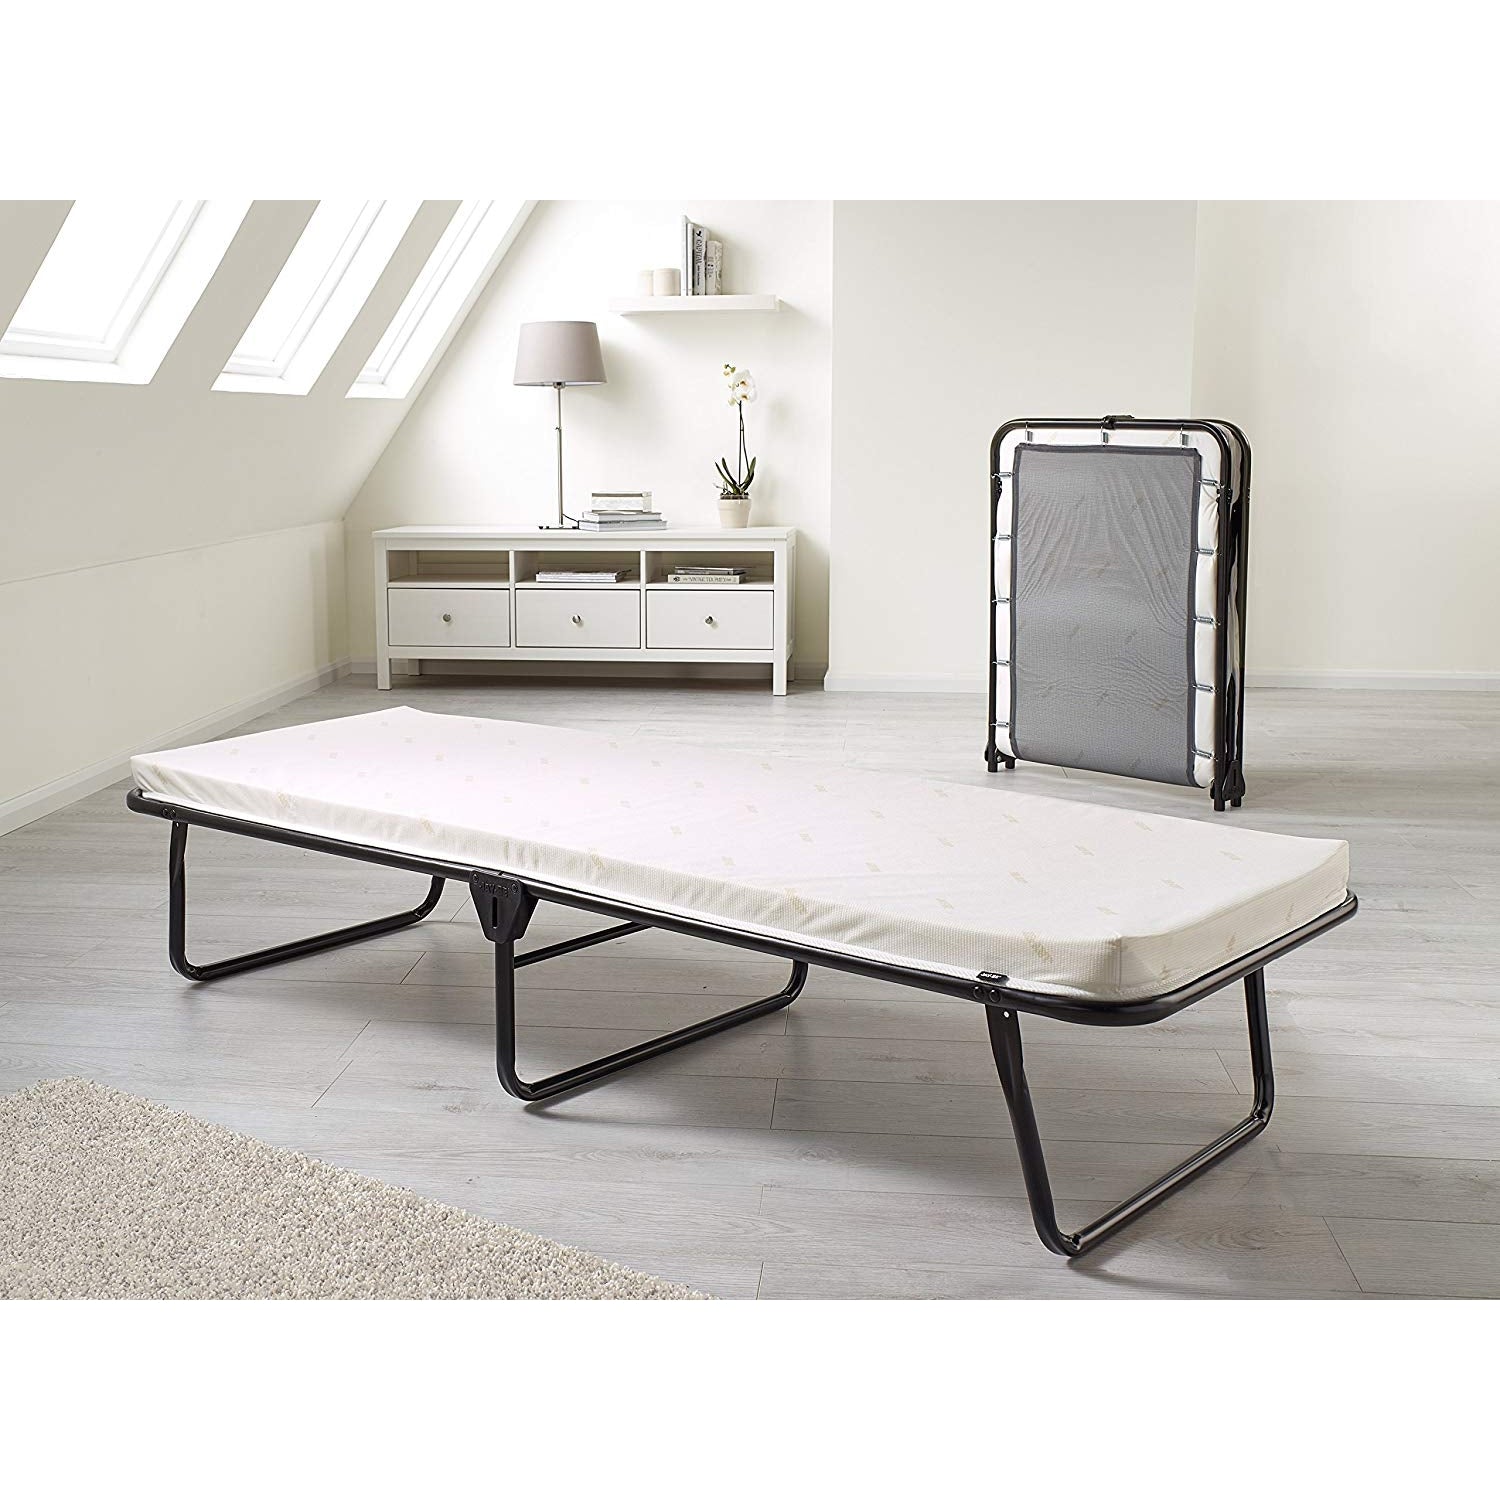 ViscoLogic Diamond Rollaway Folding Bed with Luxurious Memory Foam Mattress - Super Strong Sturdy Frame Cots and Wheels for Easy Movement